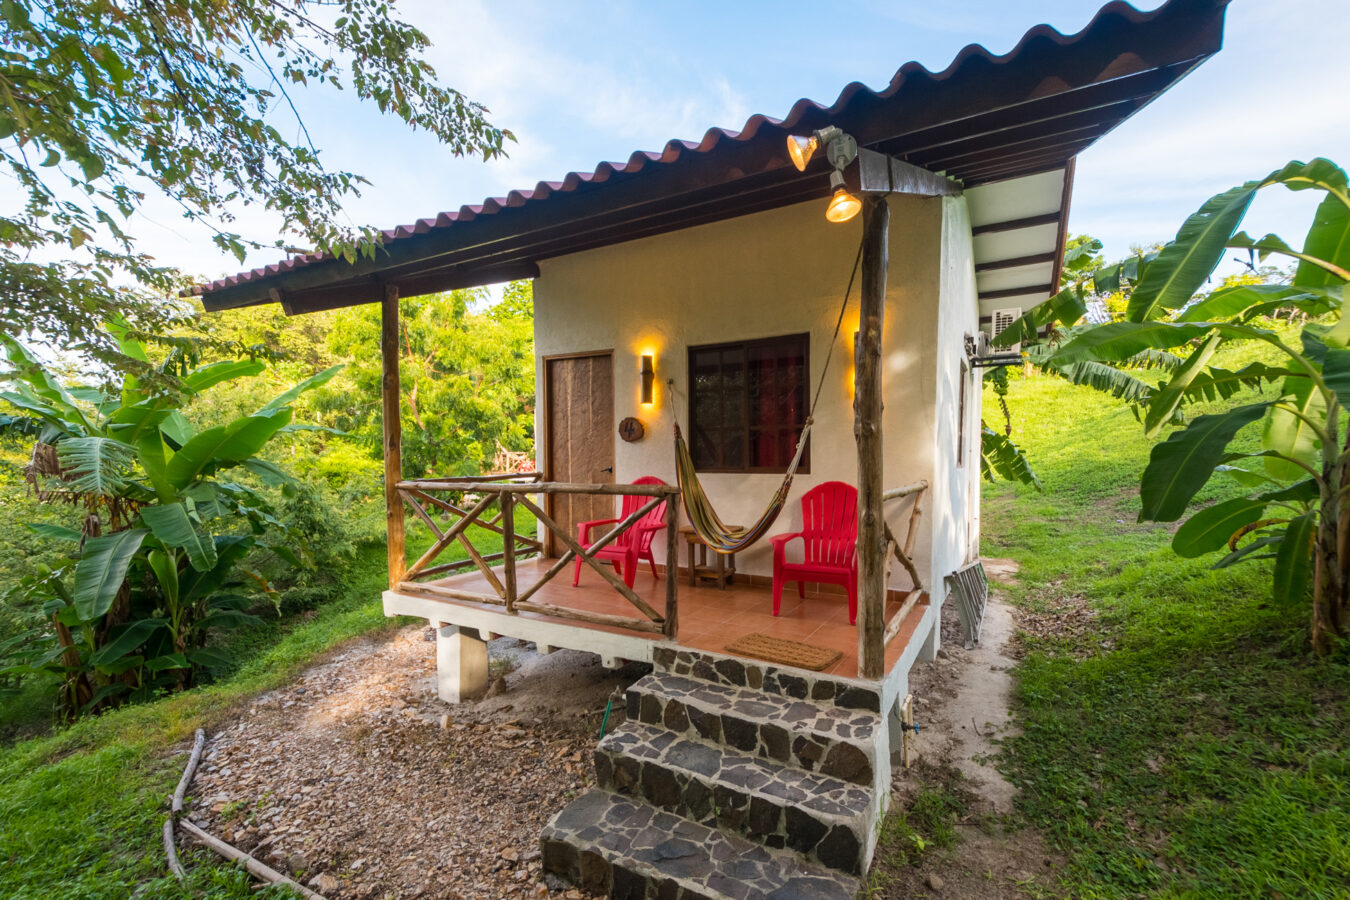 Enjoy Peaceful Simplicity and Comfort in our Jungle Cabins, steps away from a tropical beach.